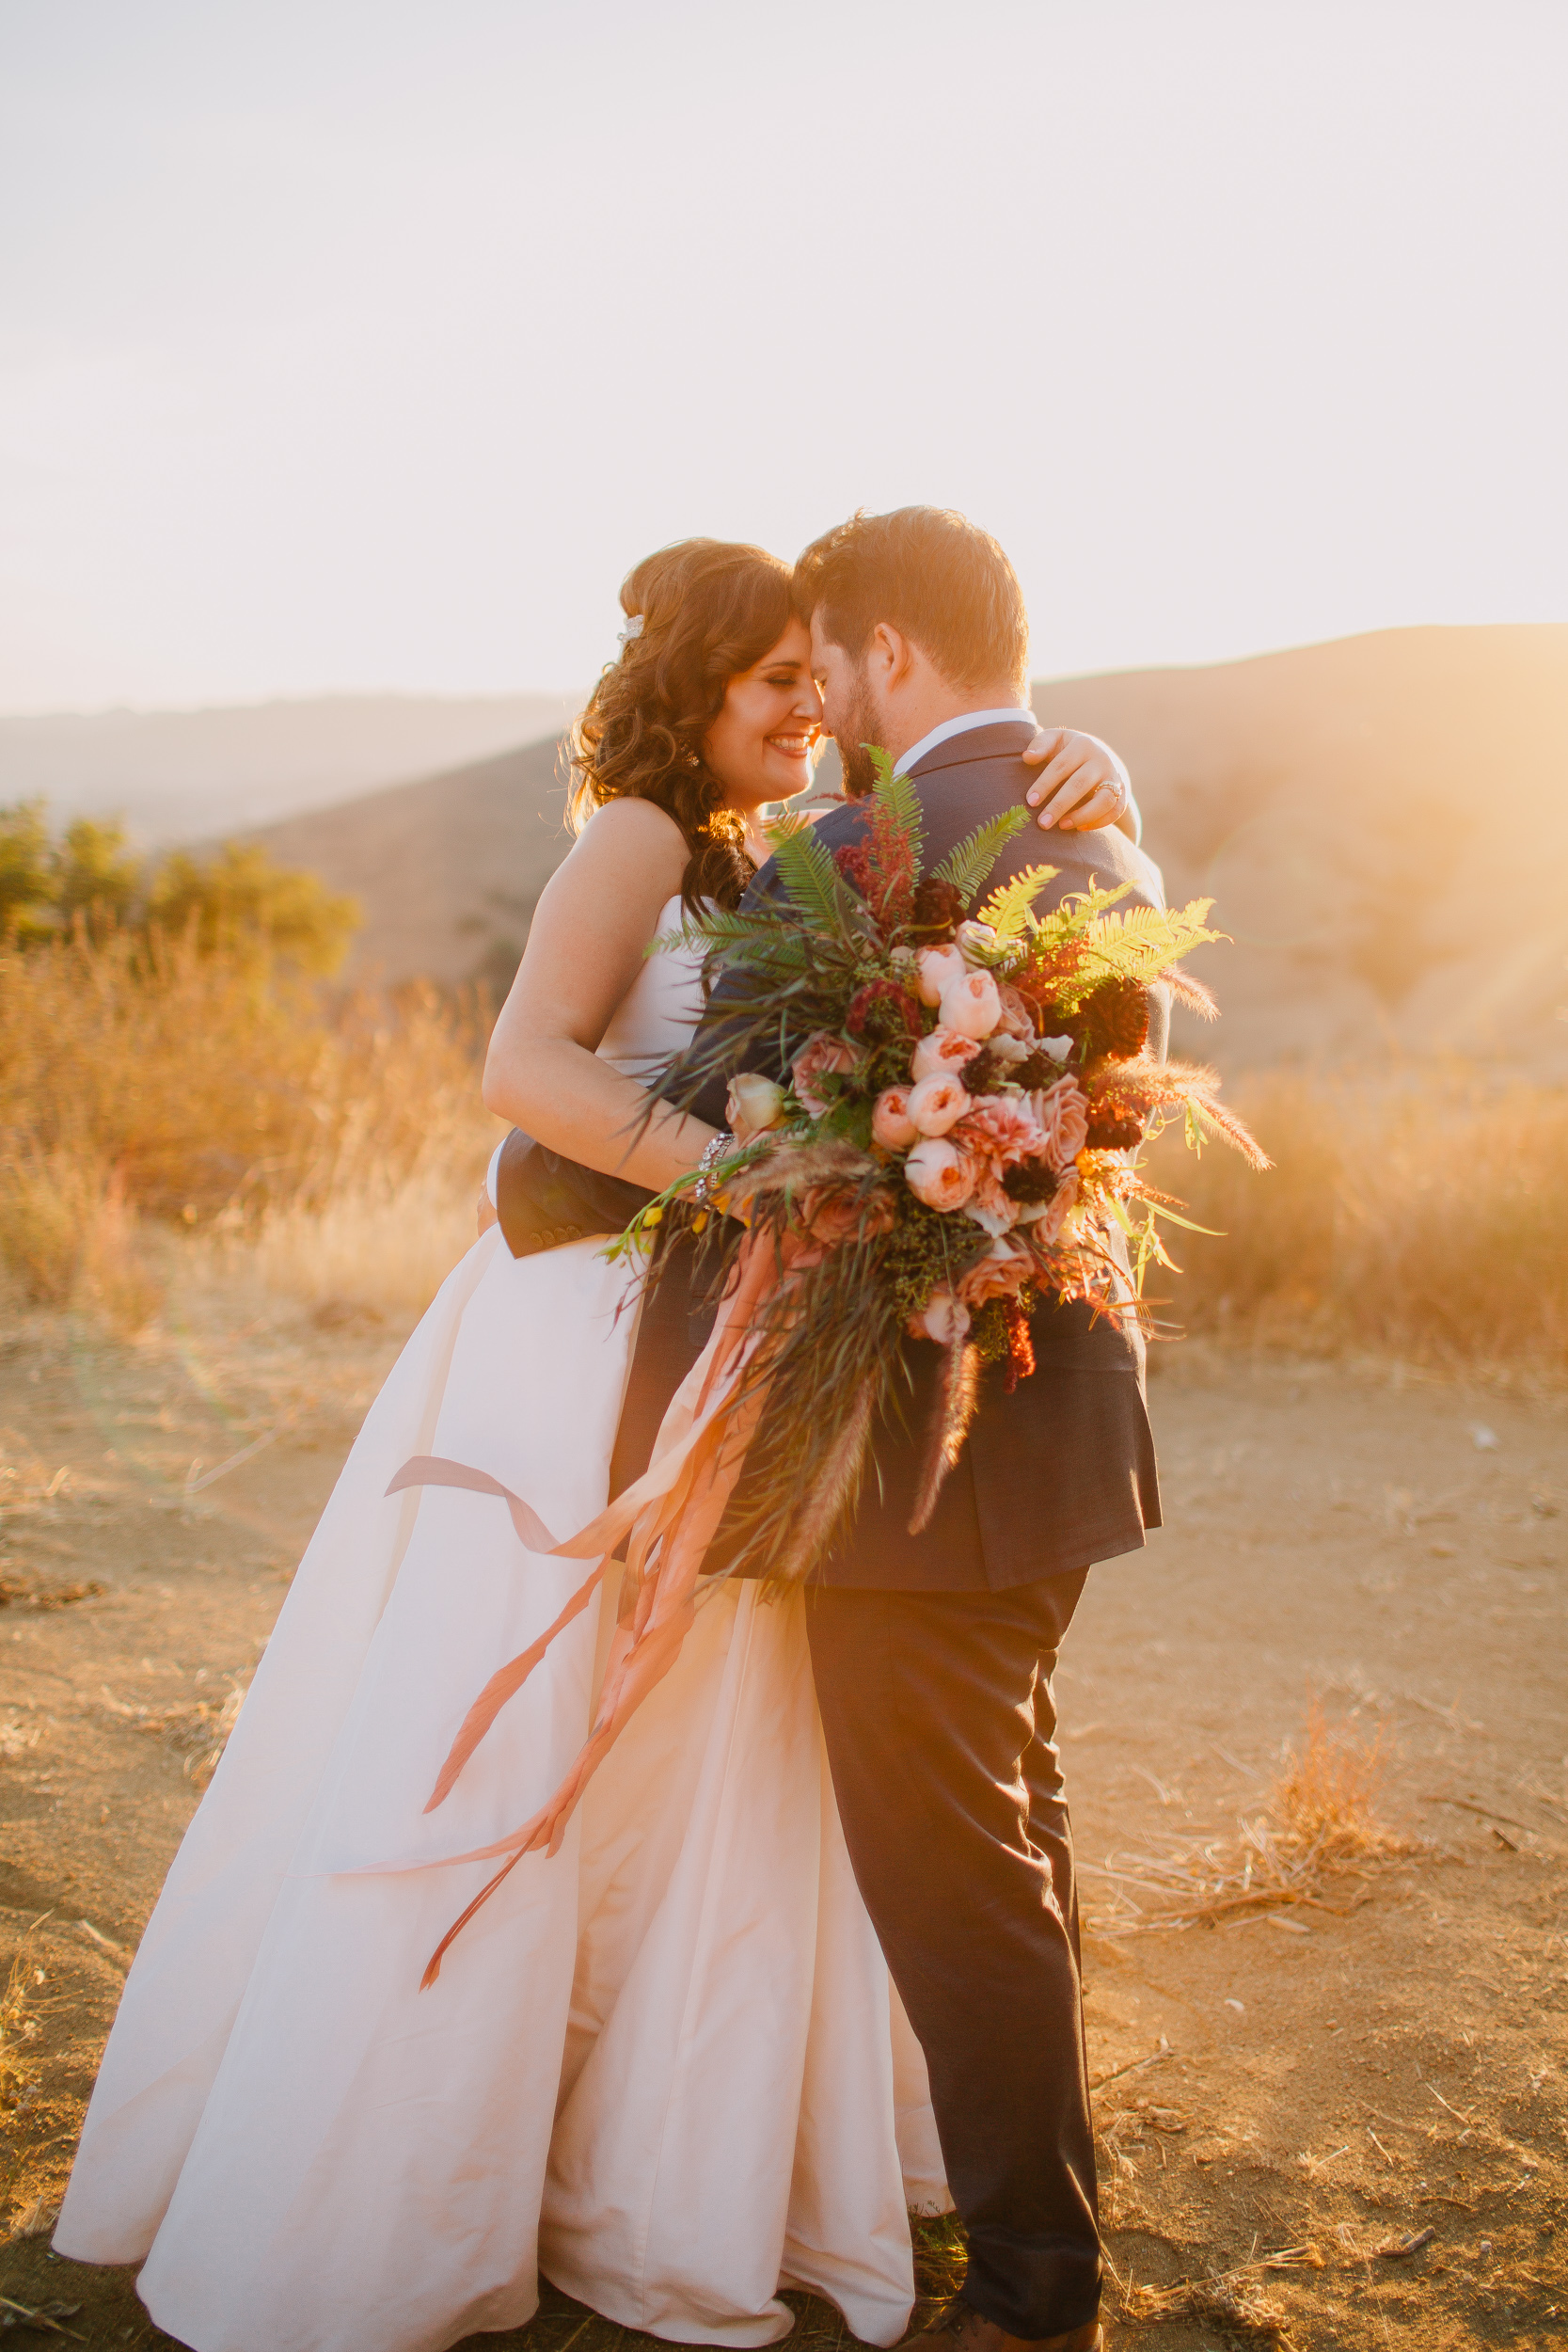 Gorgeous Real Weddings: Get Inspired for Your Special Day!